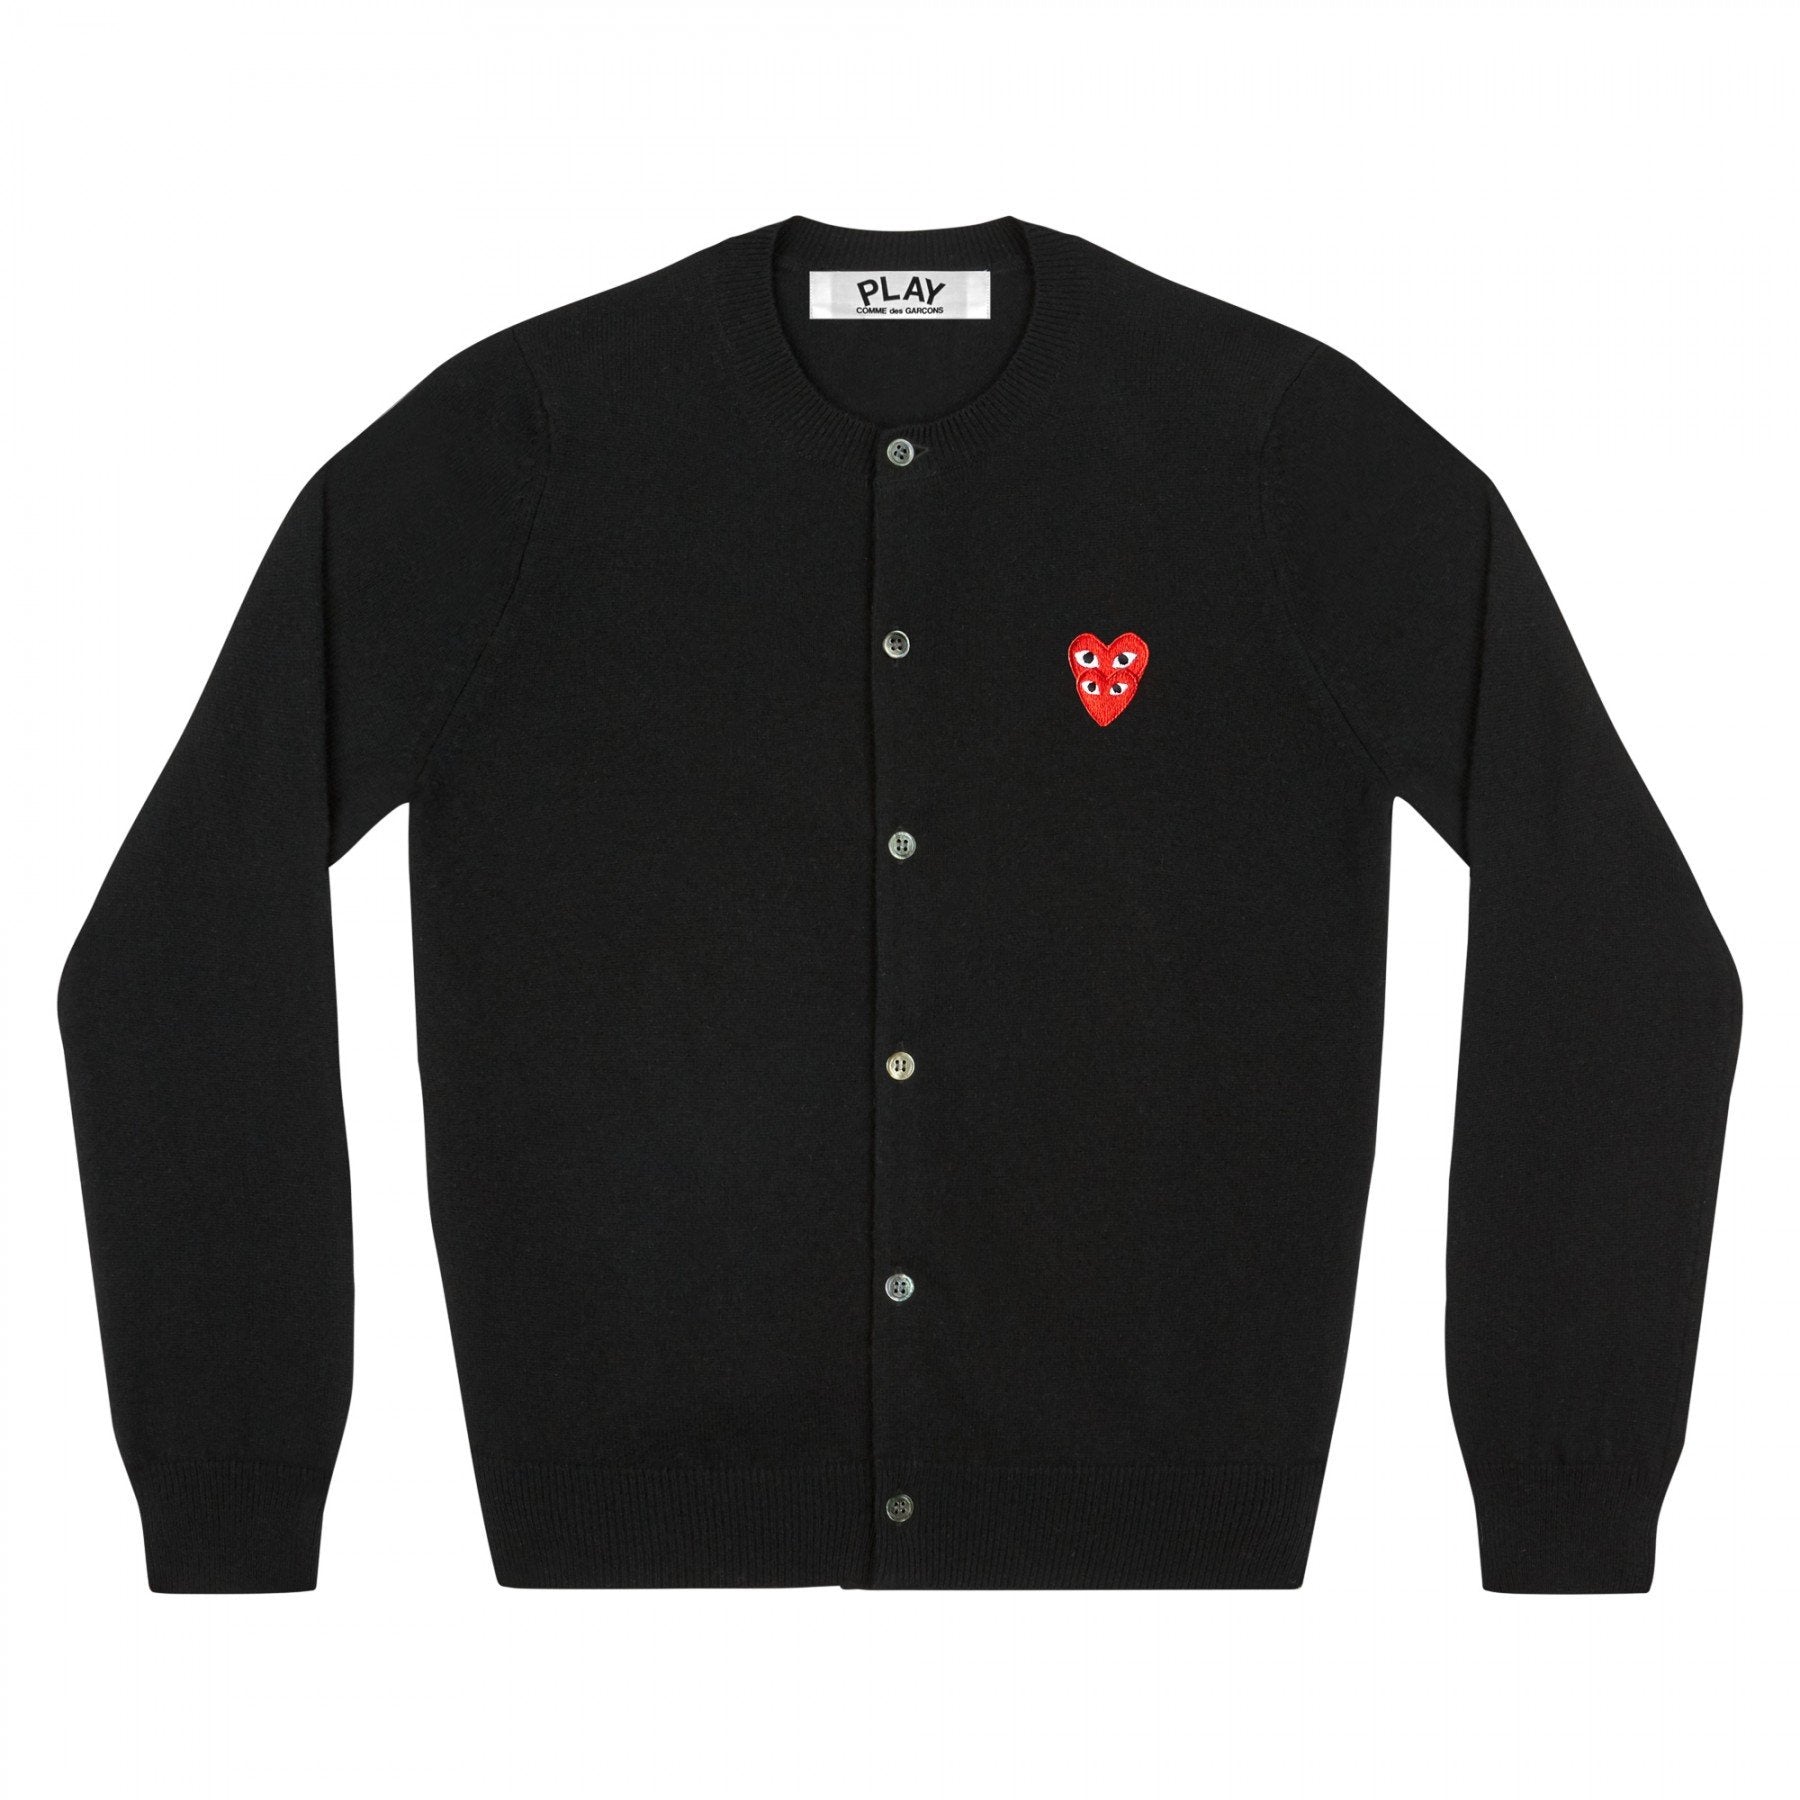 PLAY Women's Cardigan with Red Family Heart (Black)